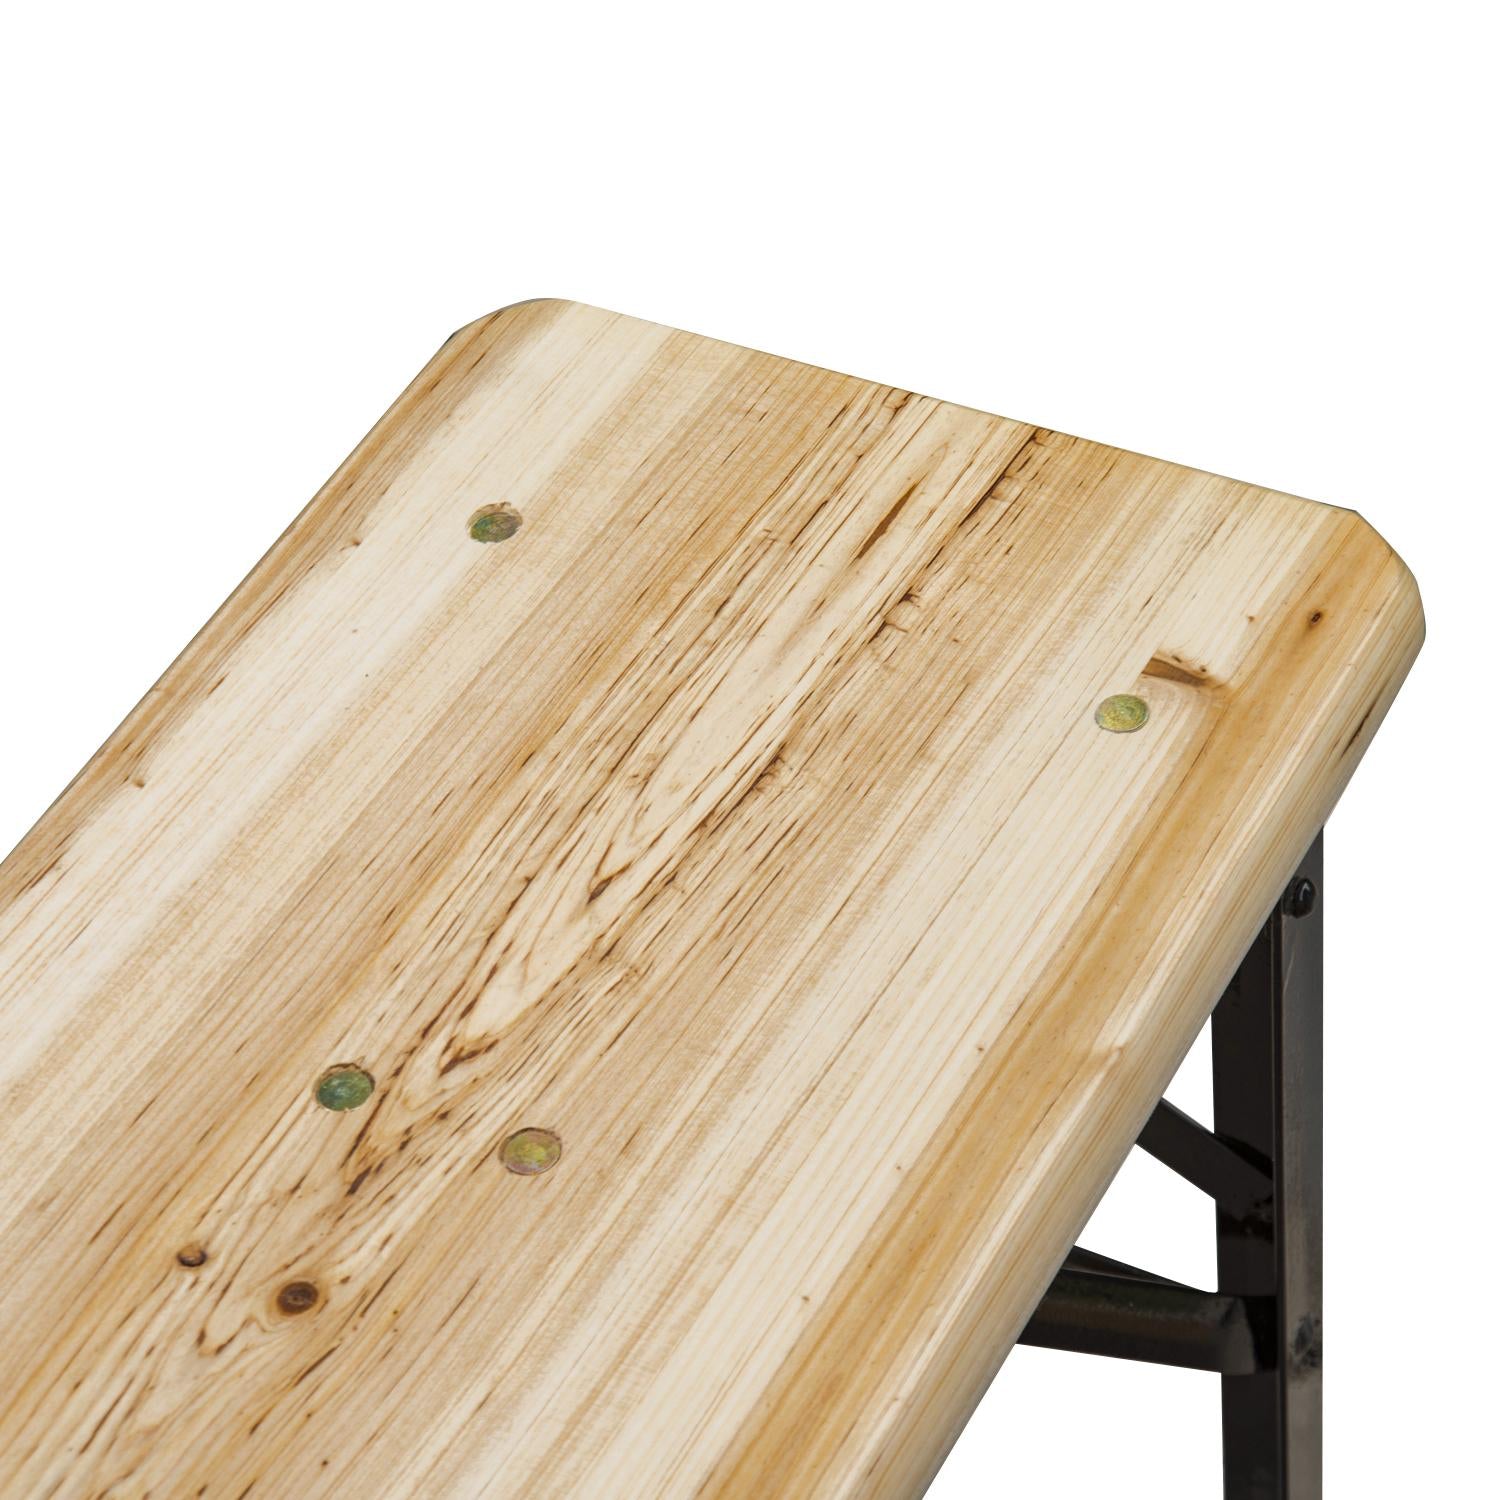 Picnic Wooden Table And Bench Set